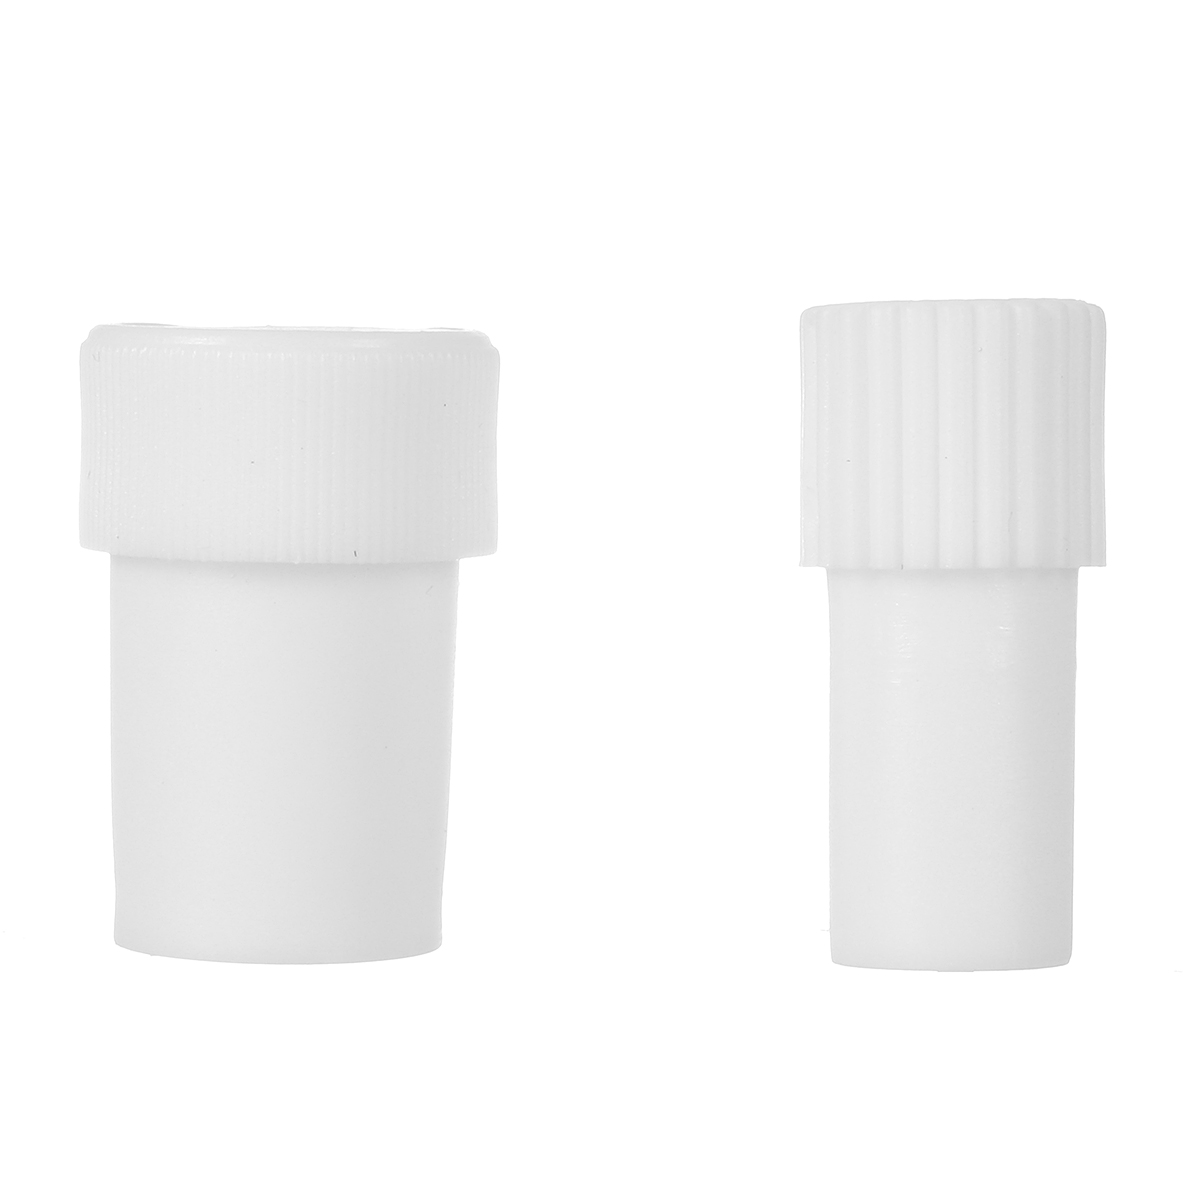 

Disposable Clean Dental Suction Tube Strength Adaptors